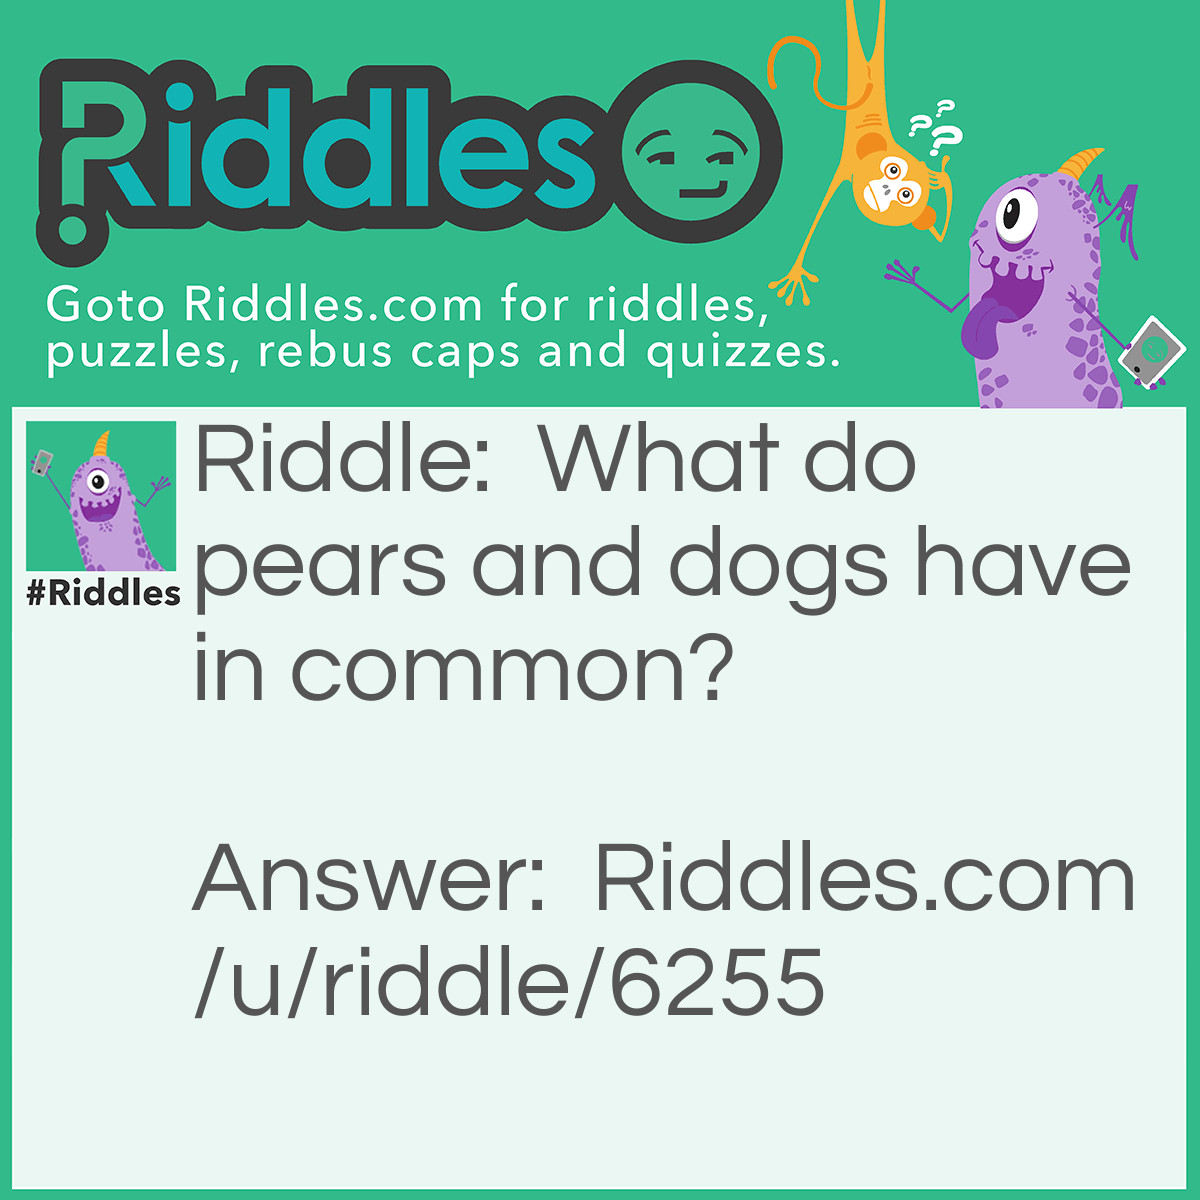 Riddle: What do pears and dogs have in common? Answer: They both have EARS!